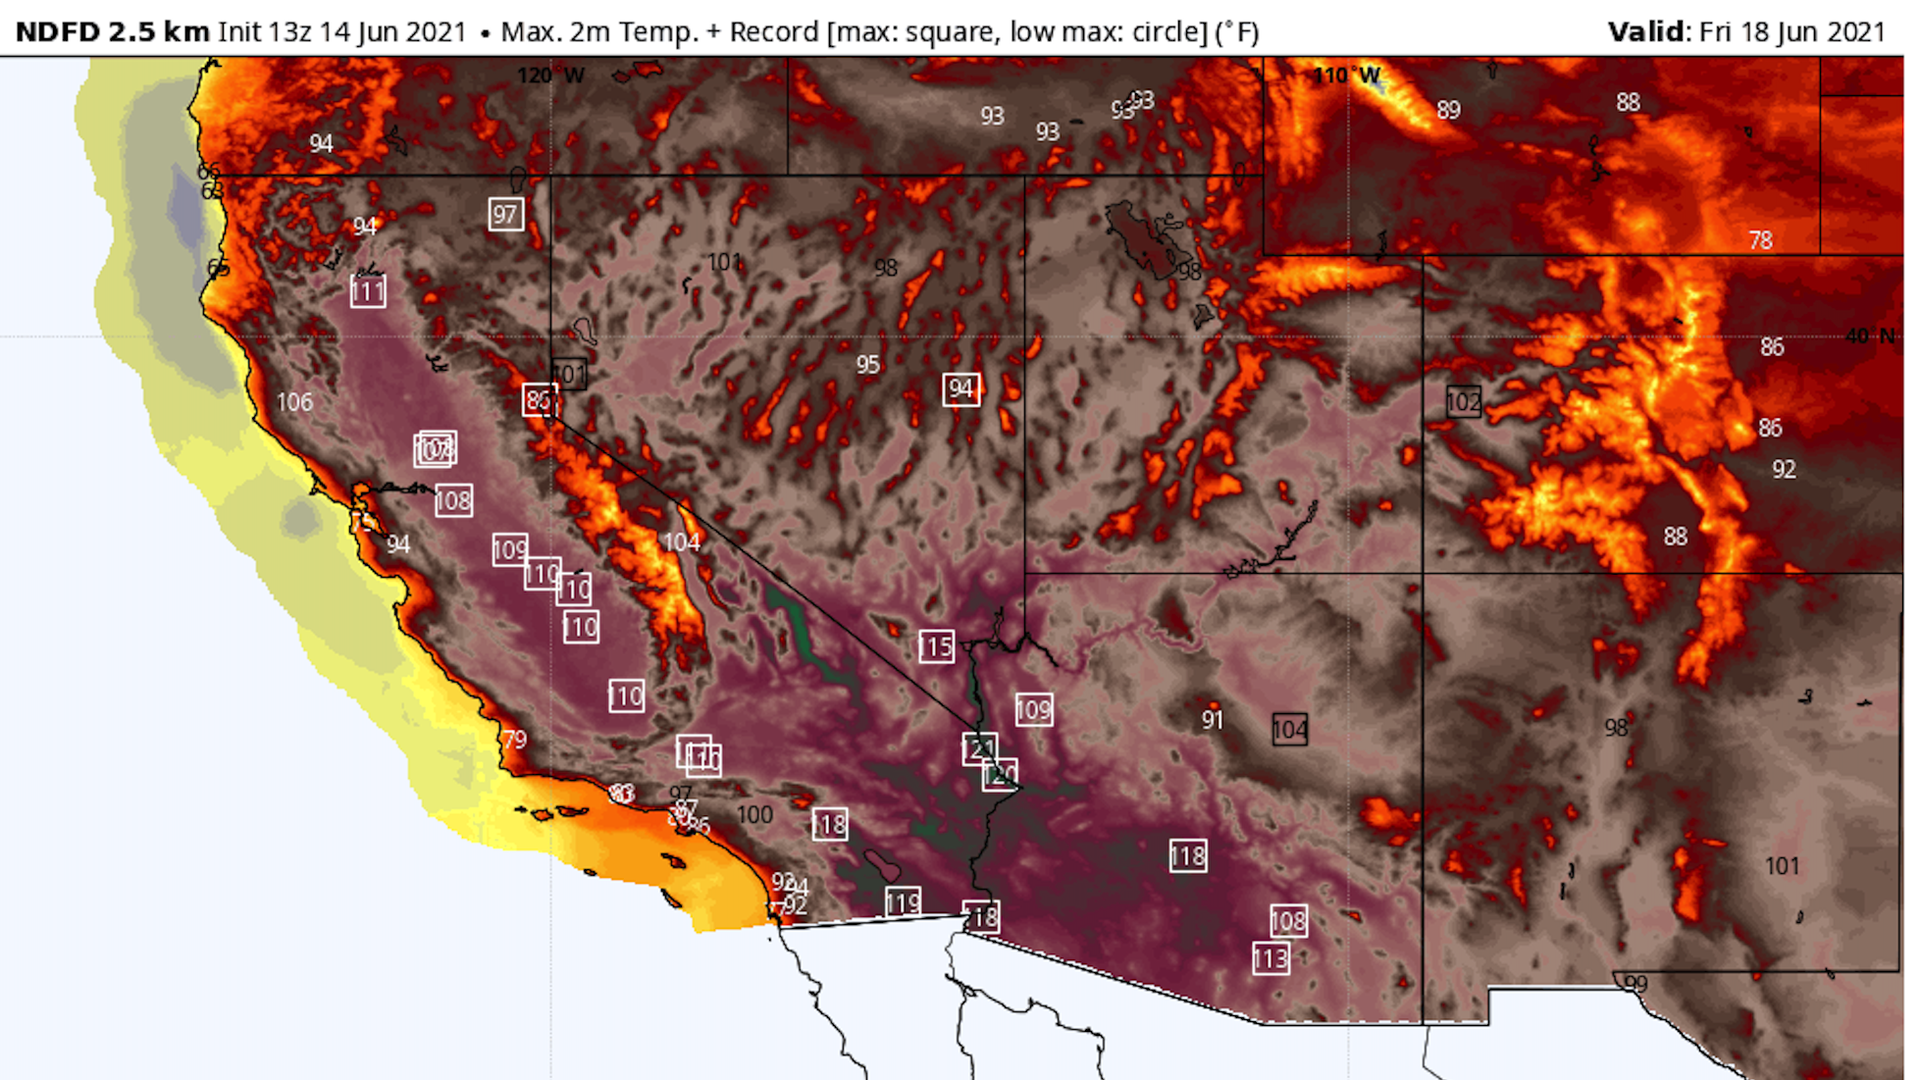 Map showing extreme heat in Southwest U.S.